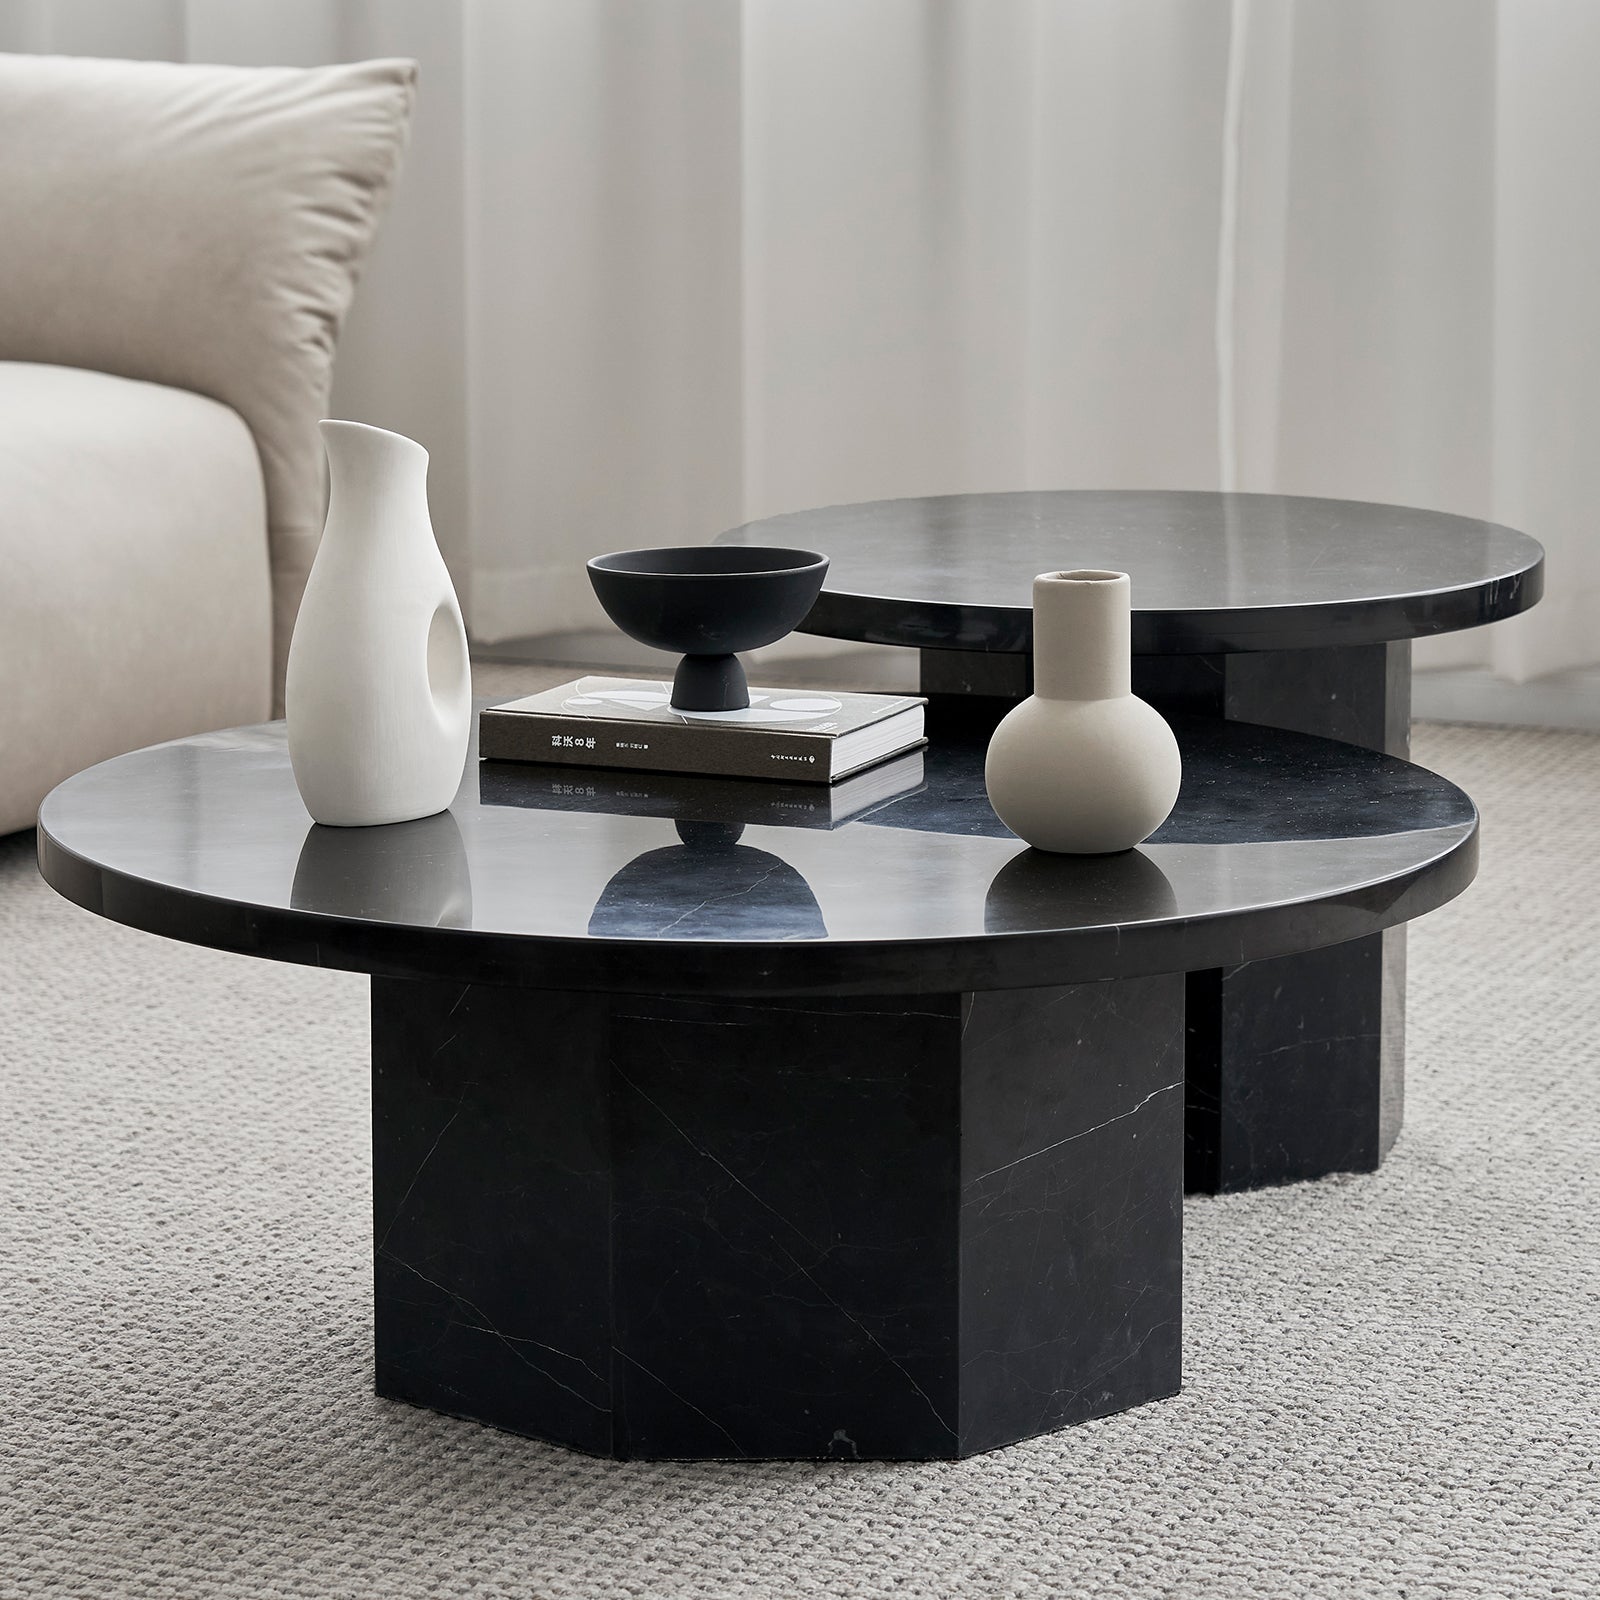 Sugar Cubes Coffee Table / Round - Black-And-White Marble - φ600mm